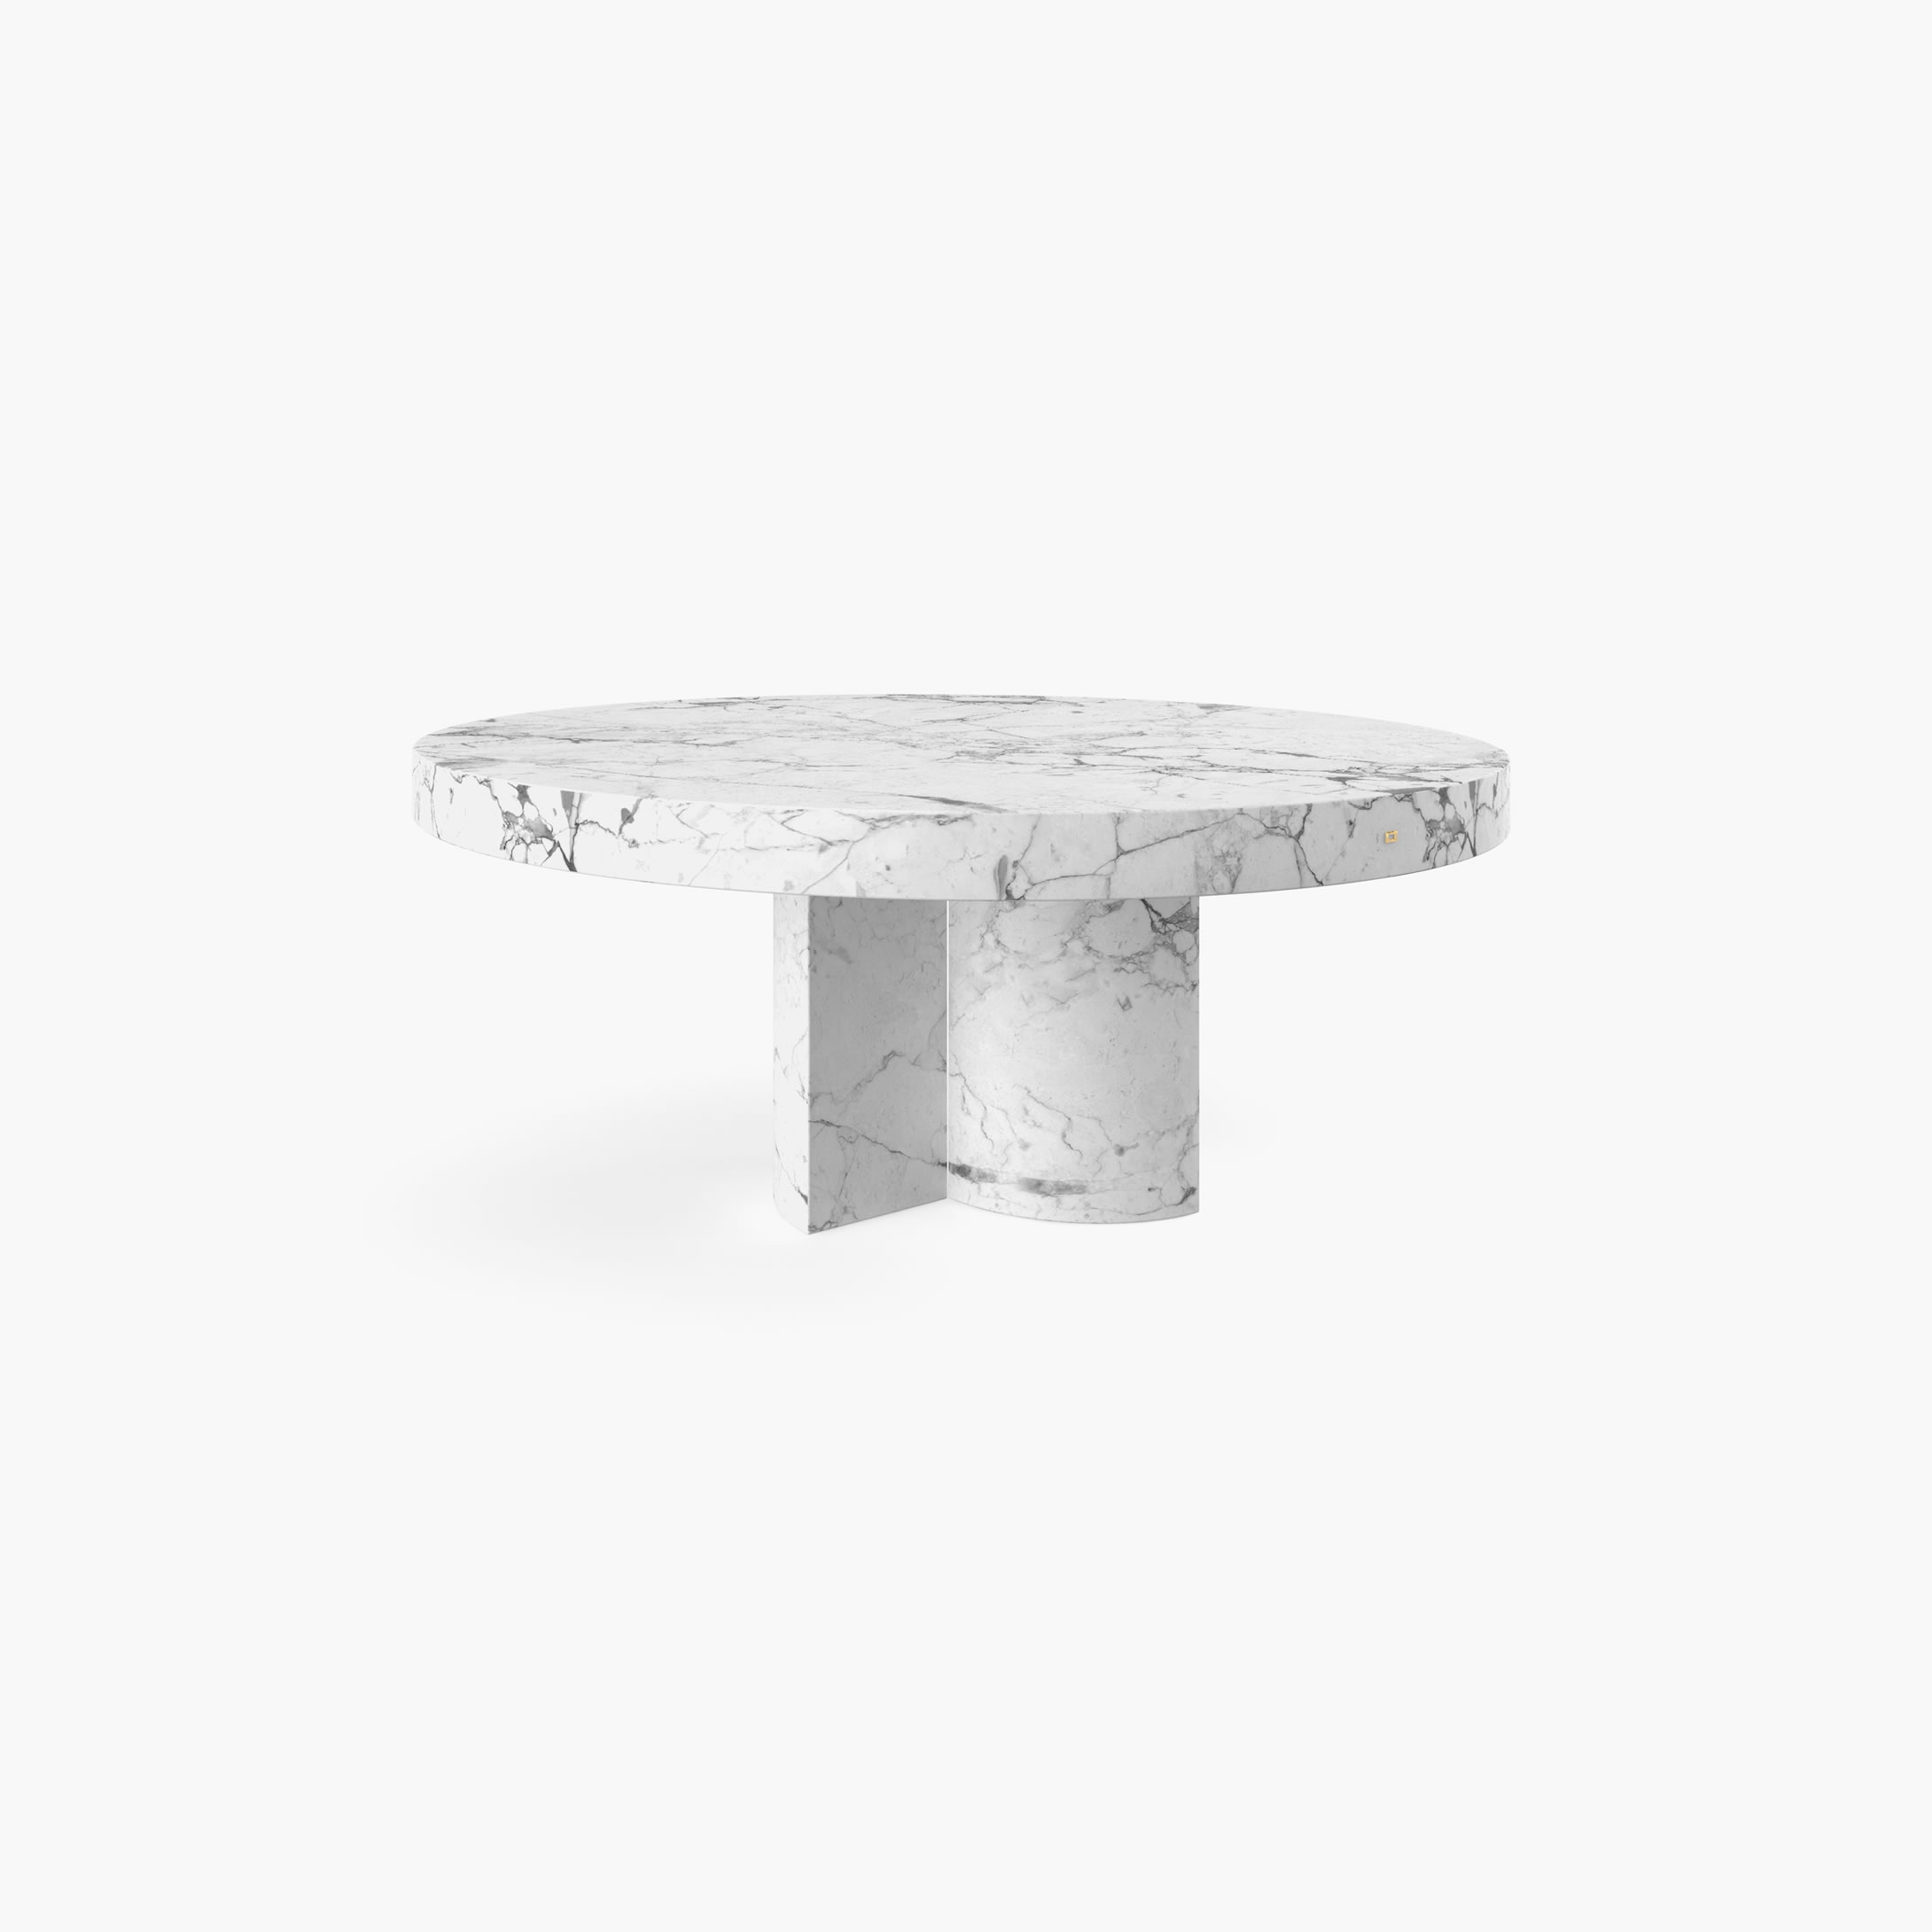 Dining Table round quarter cylinder segments legs White Arabescato Marble avant gard Dining Room minimalism Dining Tables FS 194 A FELIX SCHWAKE